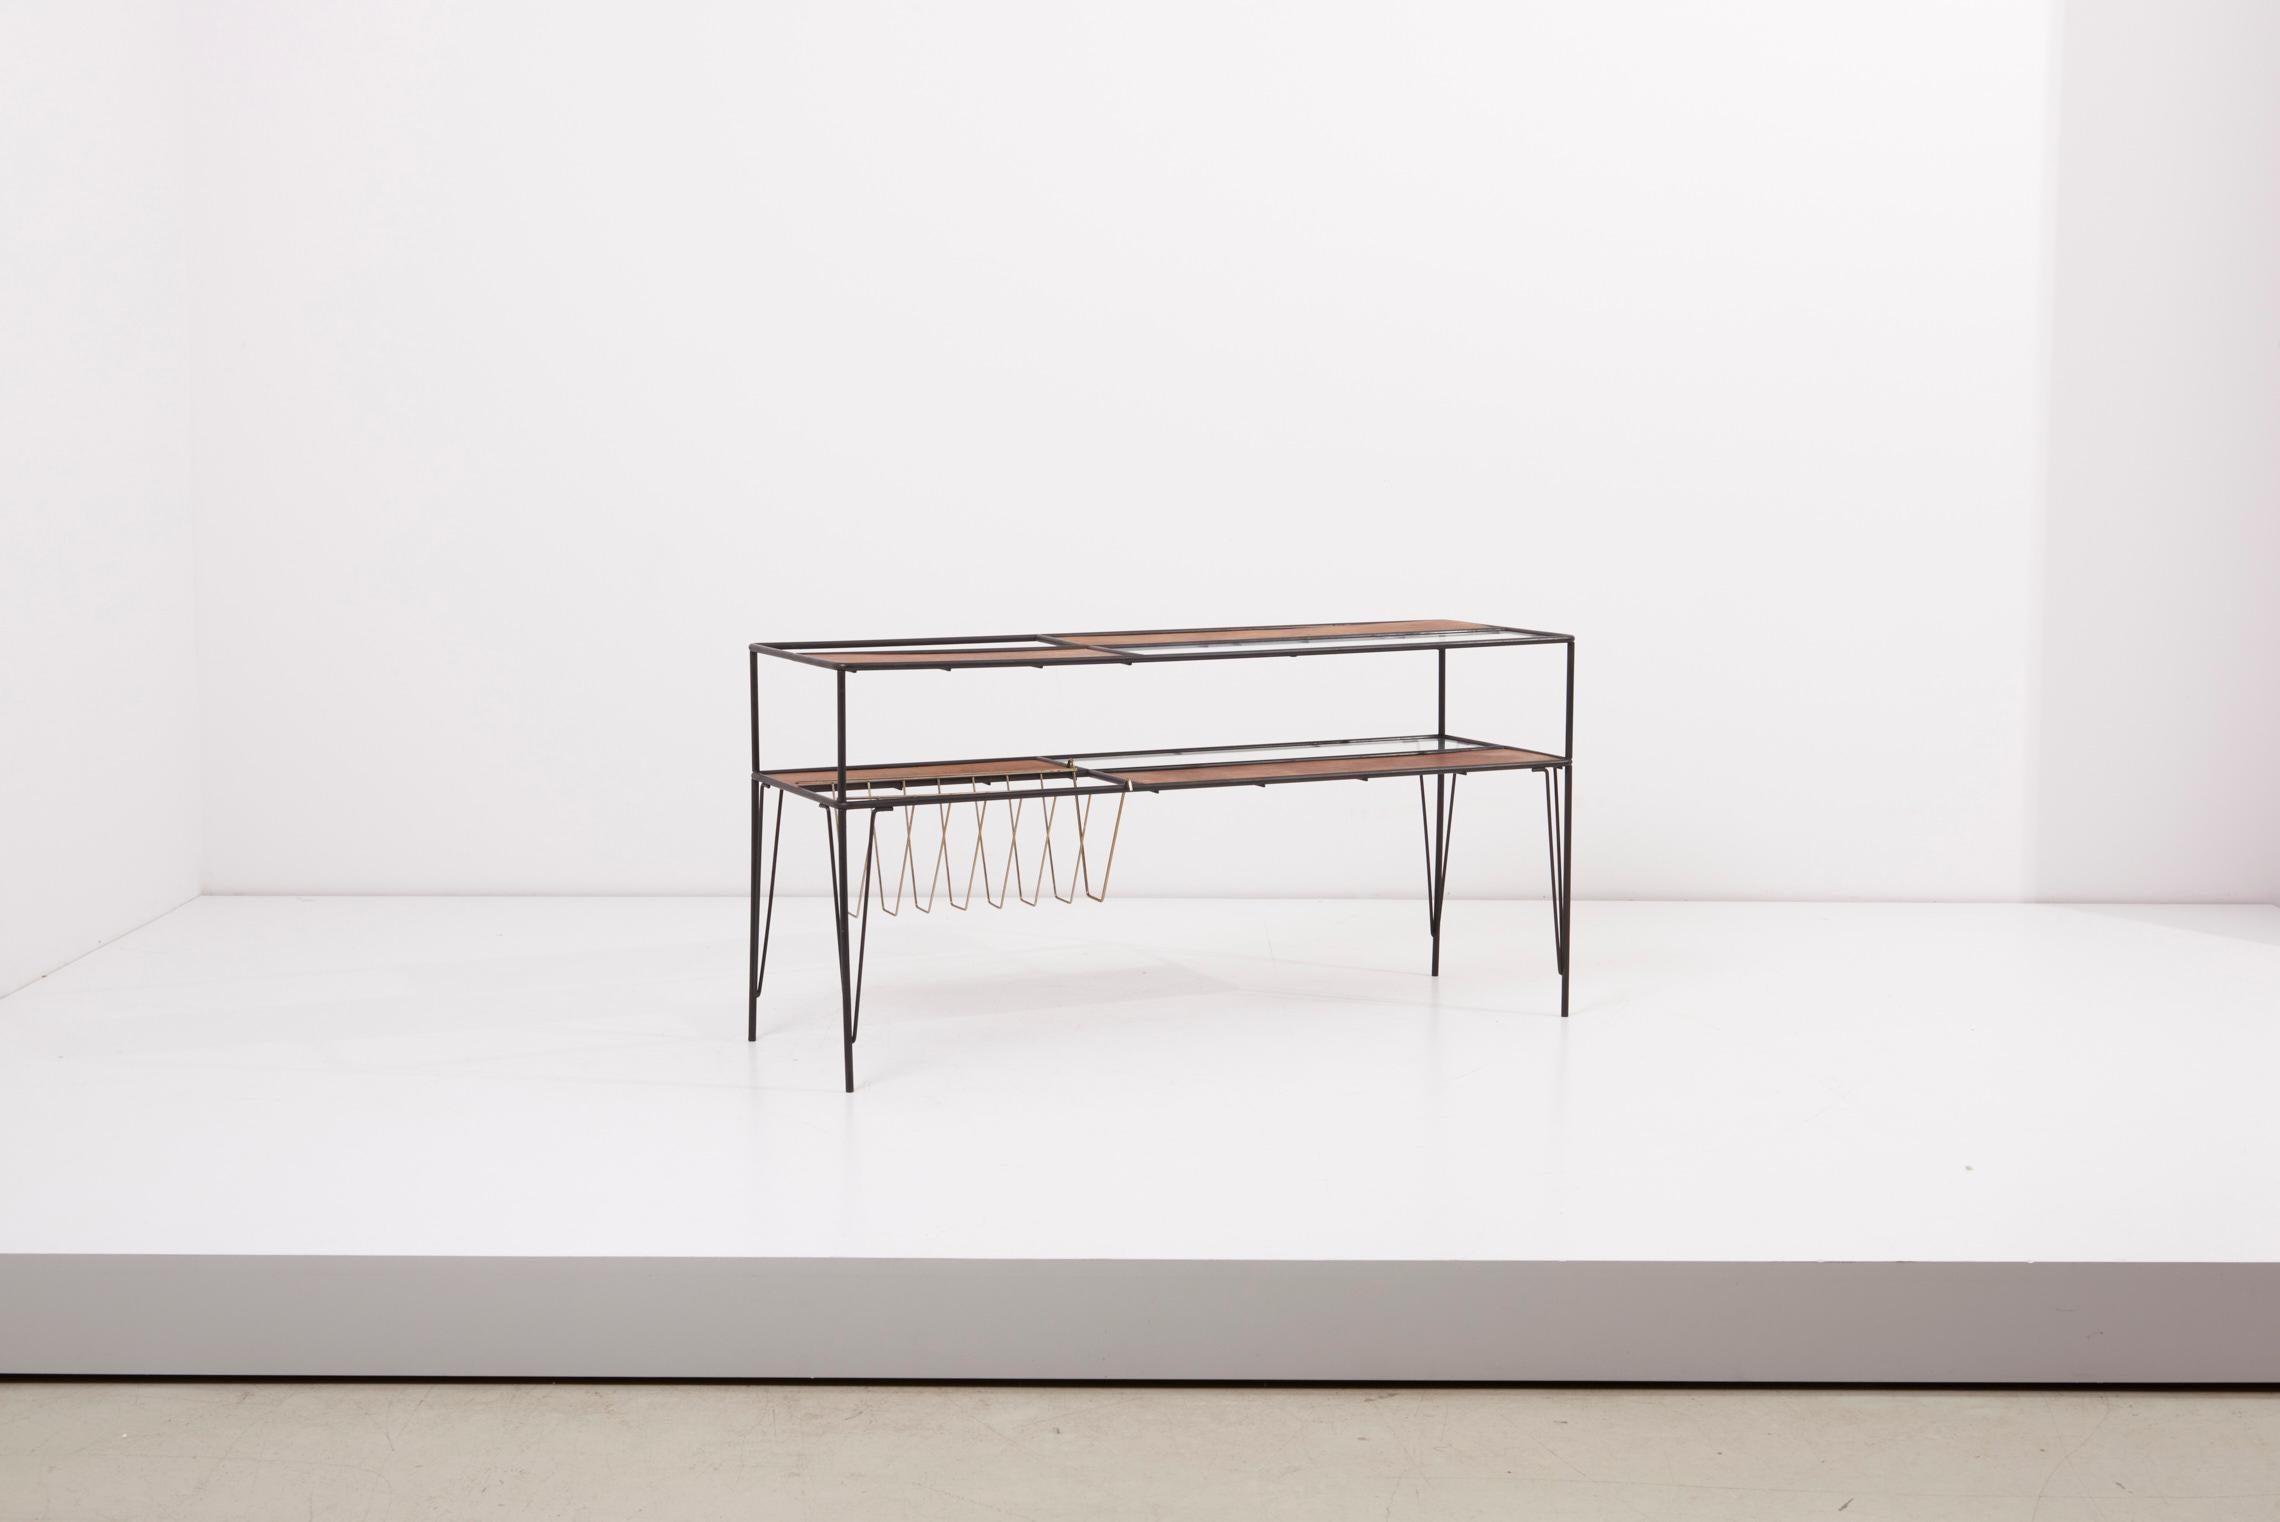 Modernist magazine rack or side coffee table in metal, wood and glass, US 1950s
The design is in the manner of Archie Kaplan.